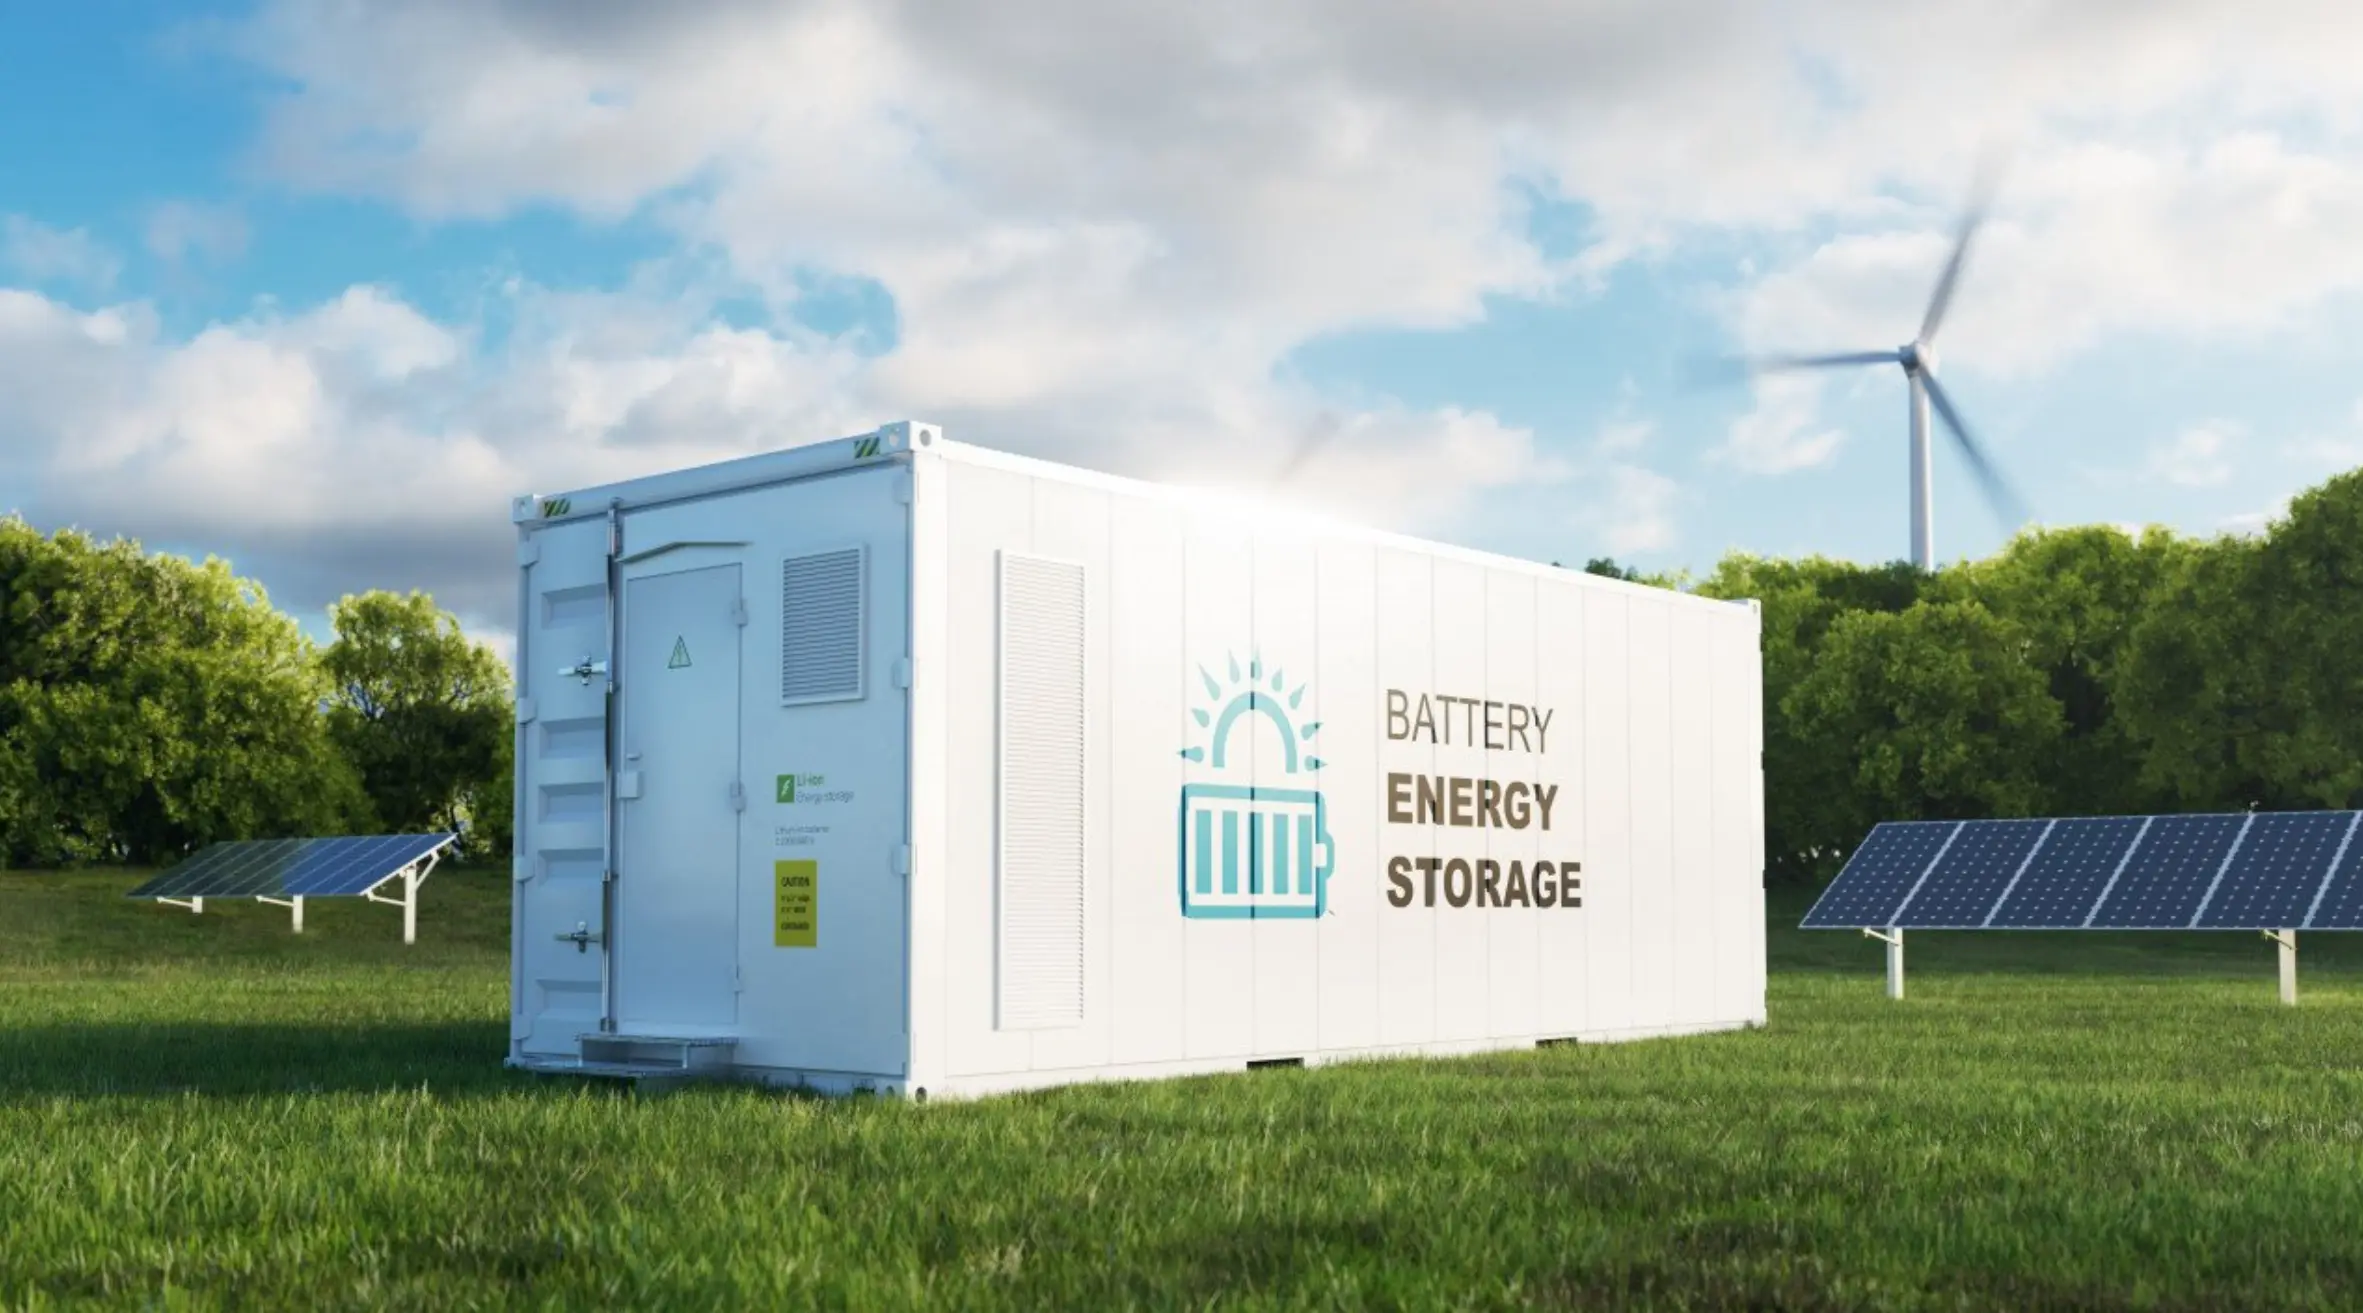 ENGIE launches Europe’s largest battery energy storage system in Belgium